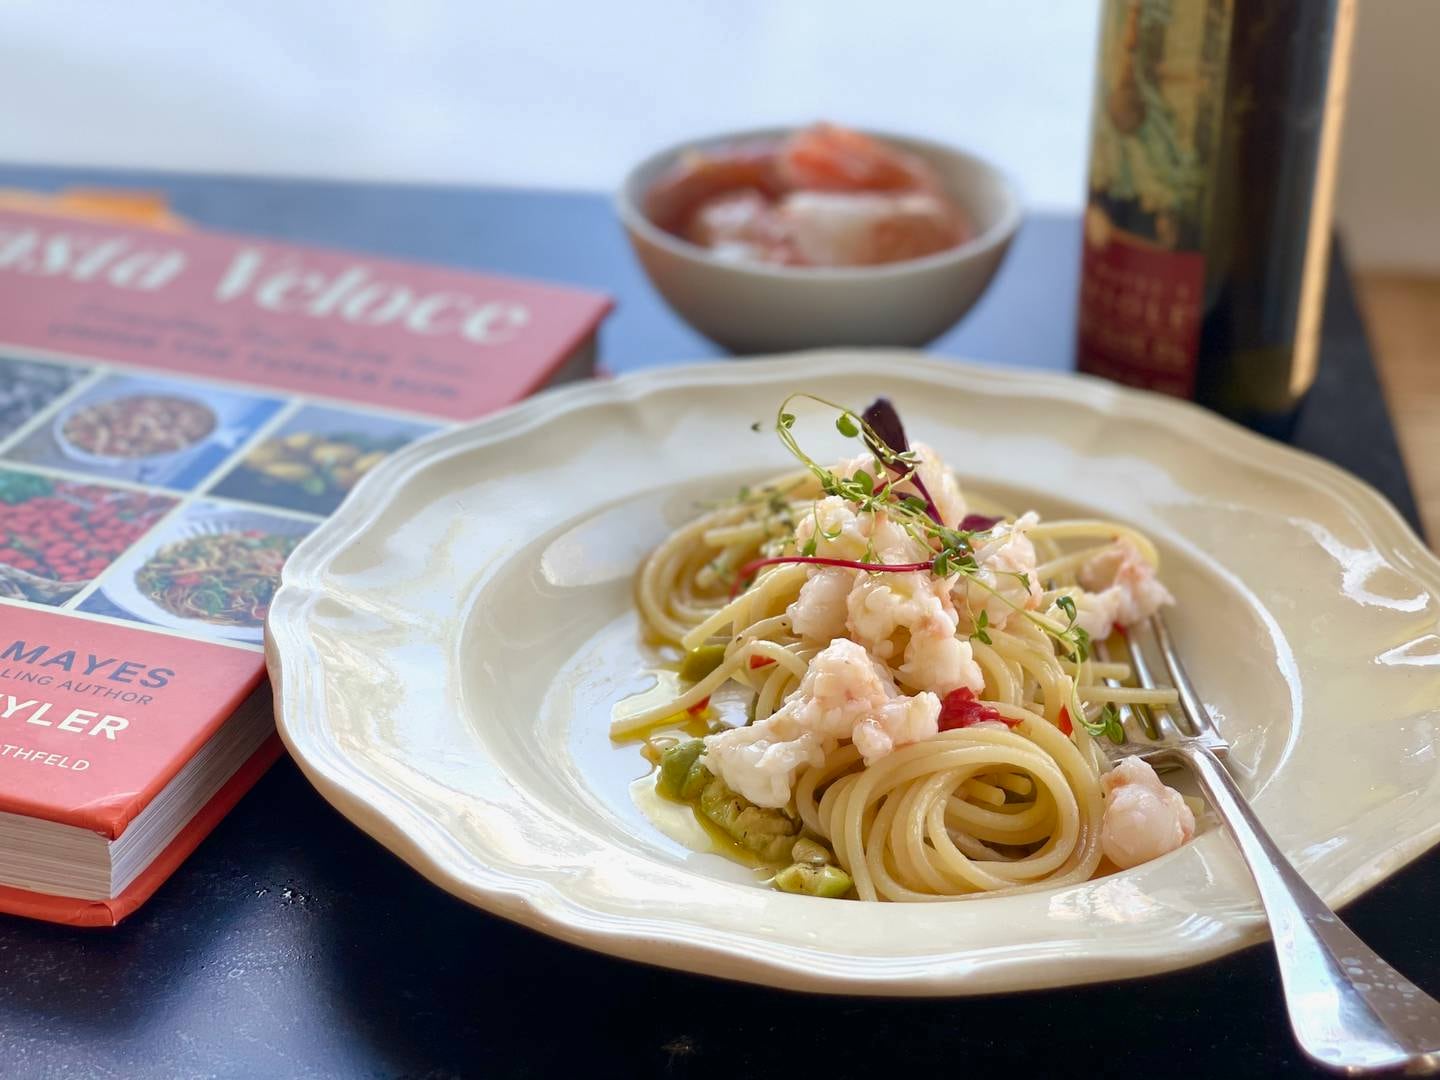 Spaghetti with shrimp and green olive sauce can be prepared in the time it takes to cook the pasta - Anchorage Daily News